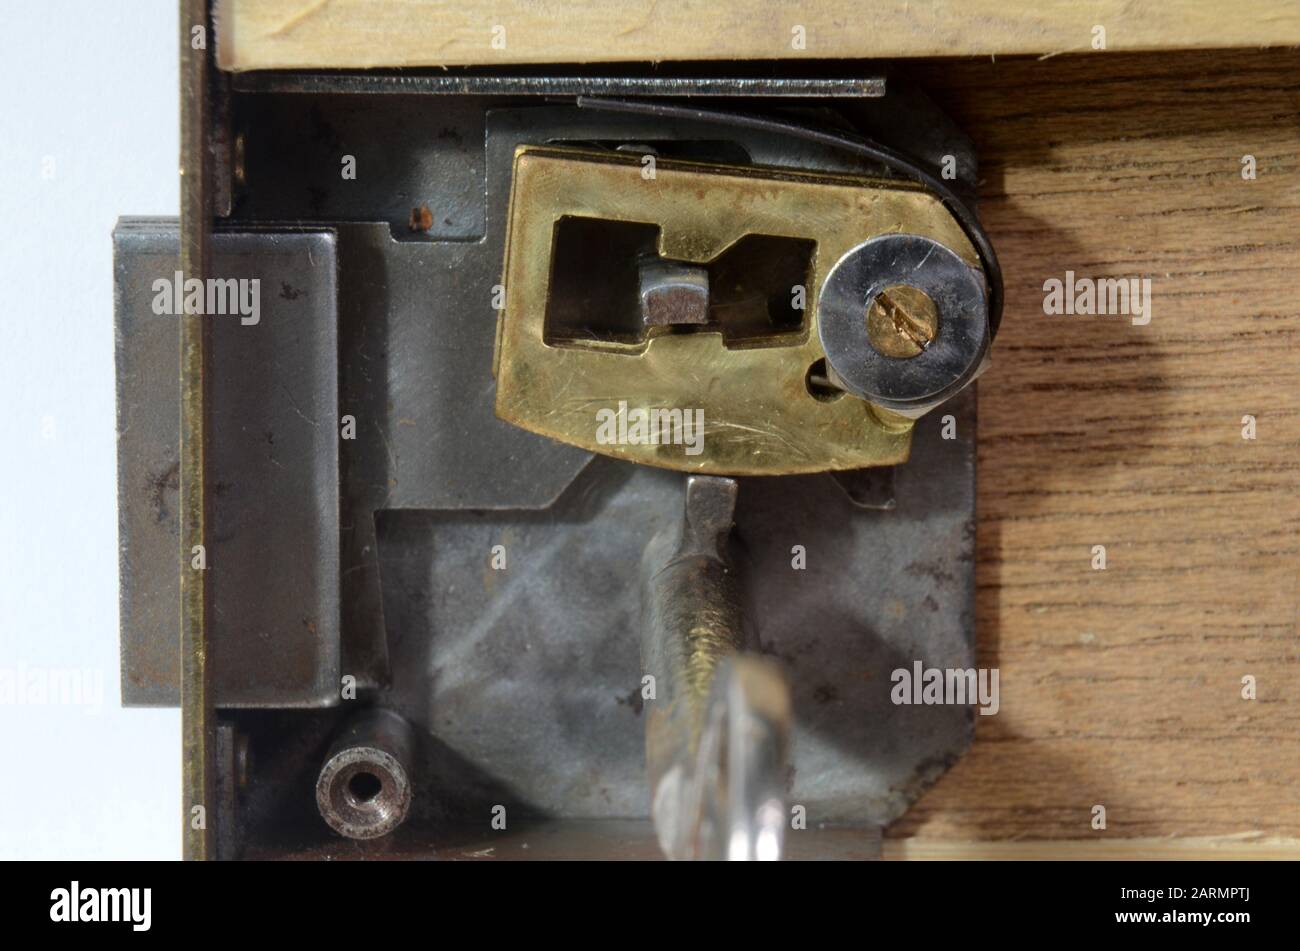 Closeup into a lock mechanism of a lever tumbler lock (front cover removed). This key fits, and the tumblers allow the opening of the lock. Stock Photo